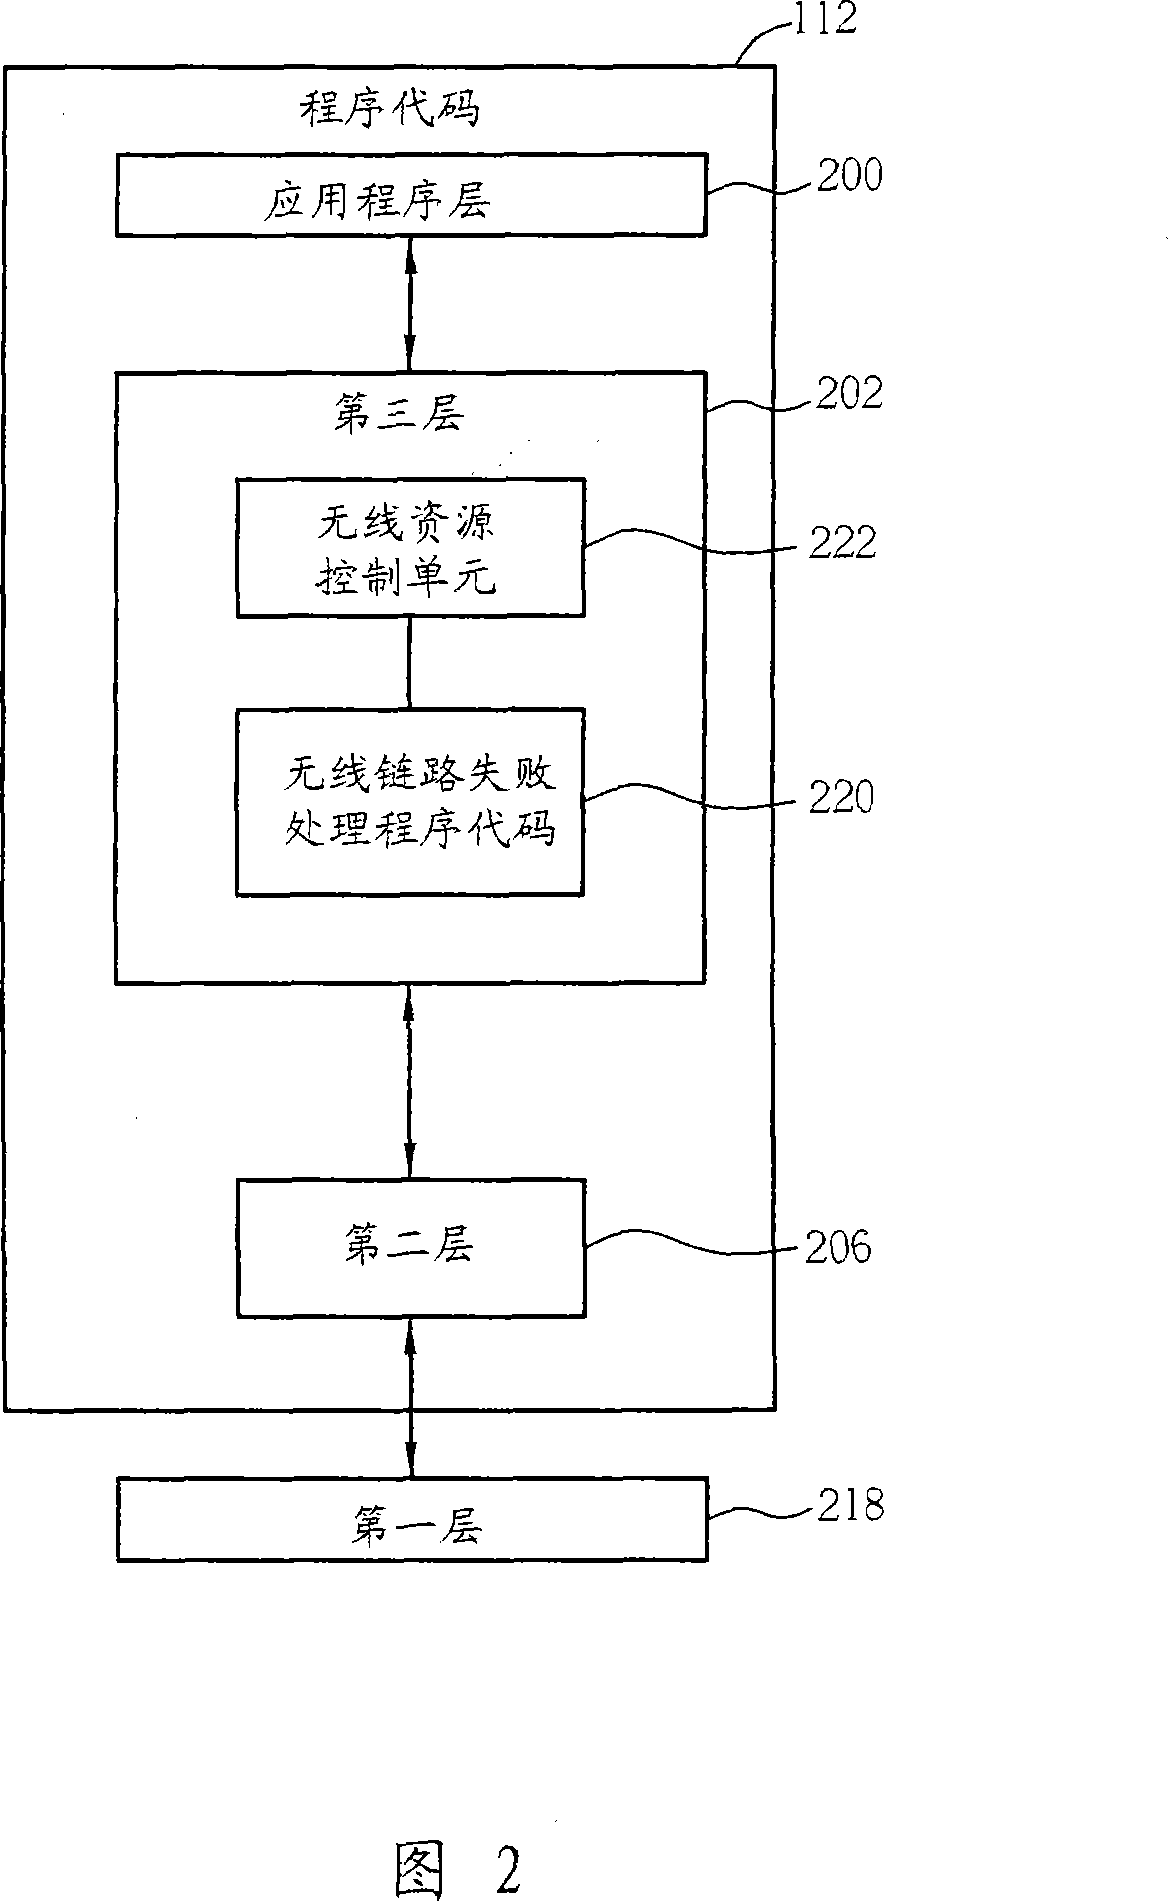 Method for handling radio link failure in wireless communications system and related apparatus